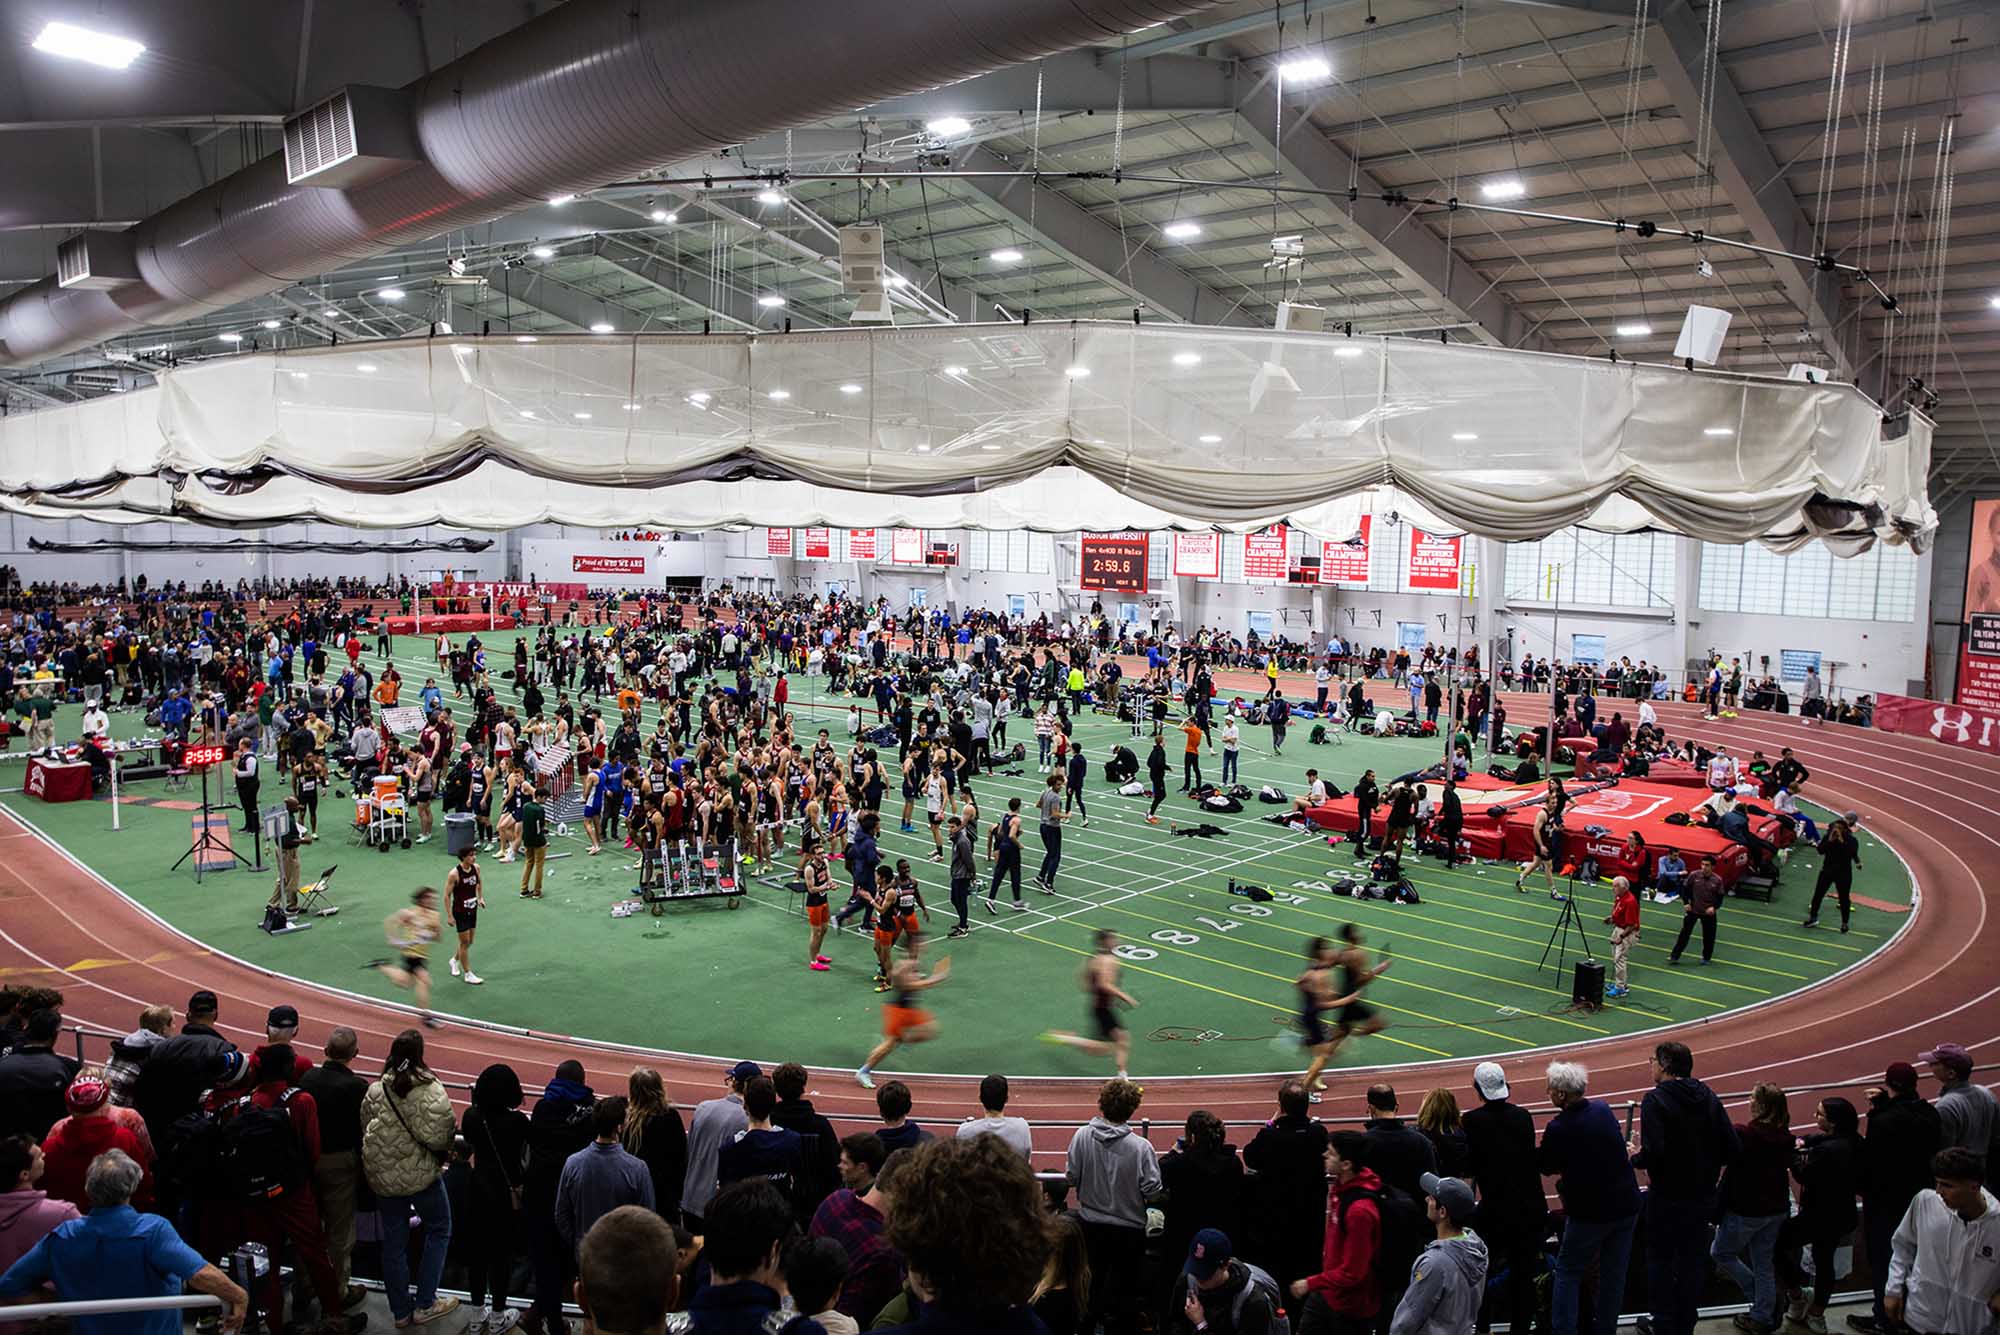 Overhead shot of the indoor track at the BU Track and Tennis Center. The shot shows bustling activity during the annual David Hemery Valentine Invitational, as runners are shown racing on the track, pole vaulters and high jumpers are on the green infield, and people spectate in the stands.